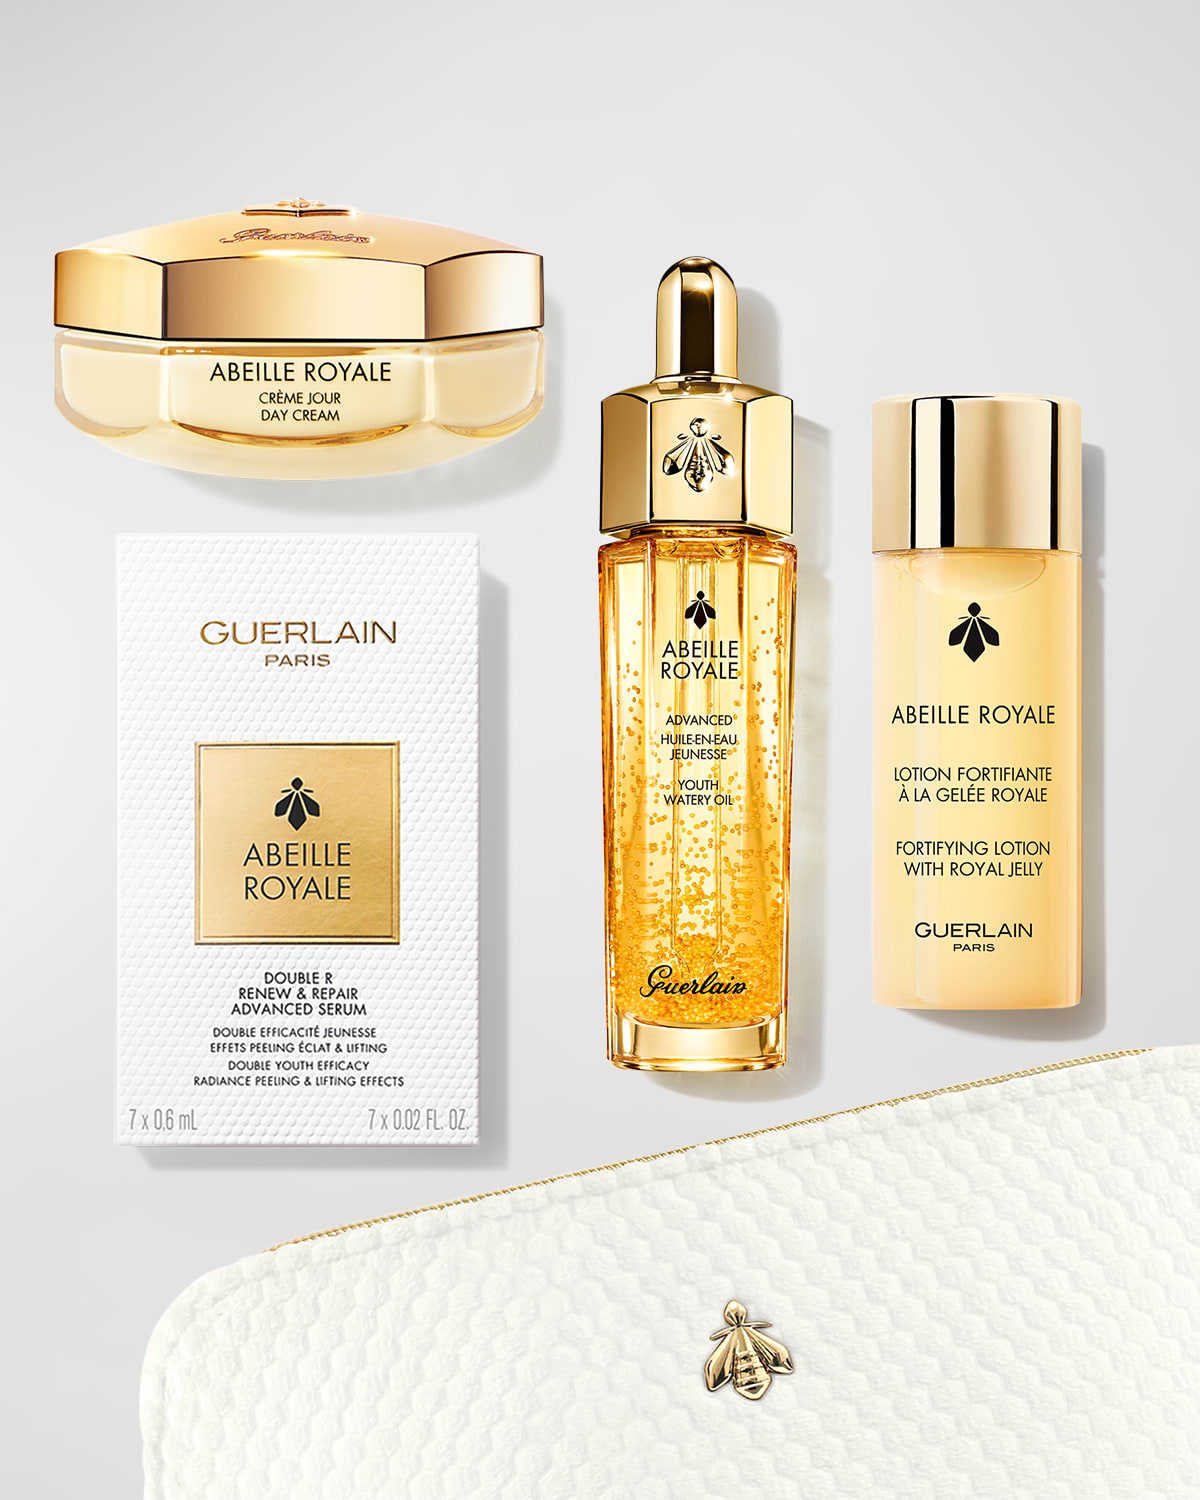 Limited Edition Abeille Royale Oil & Day Cream Set ($260 Value)